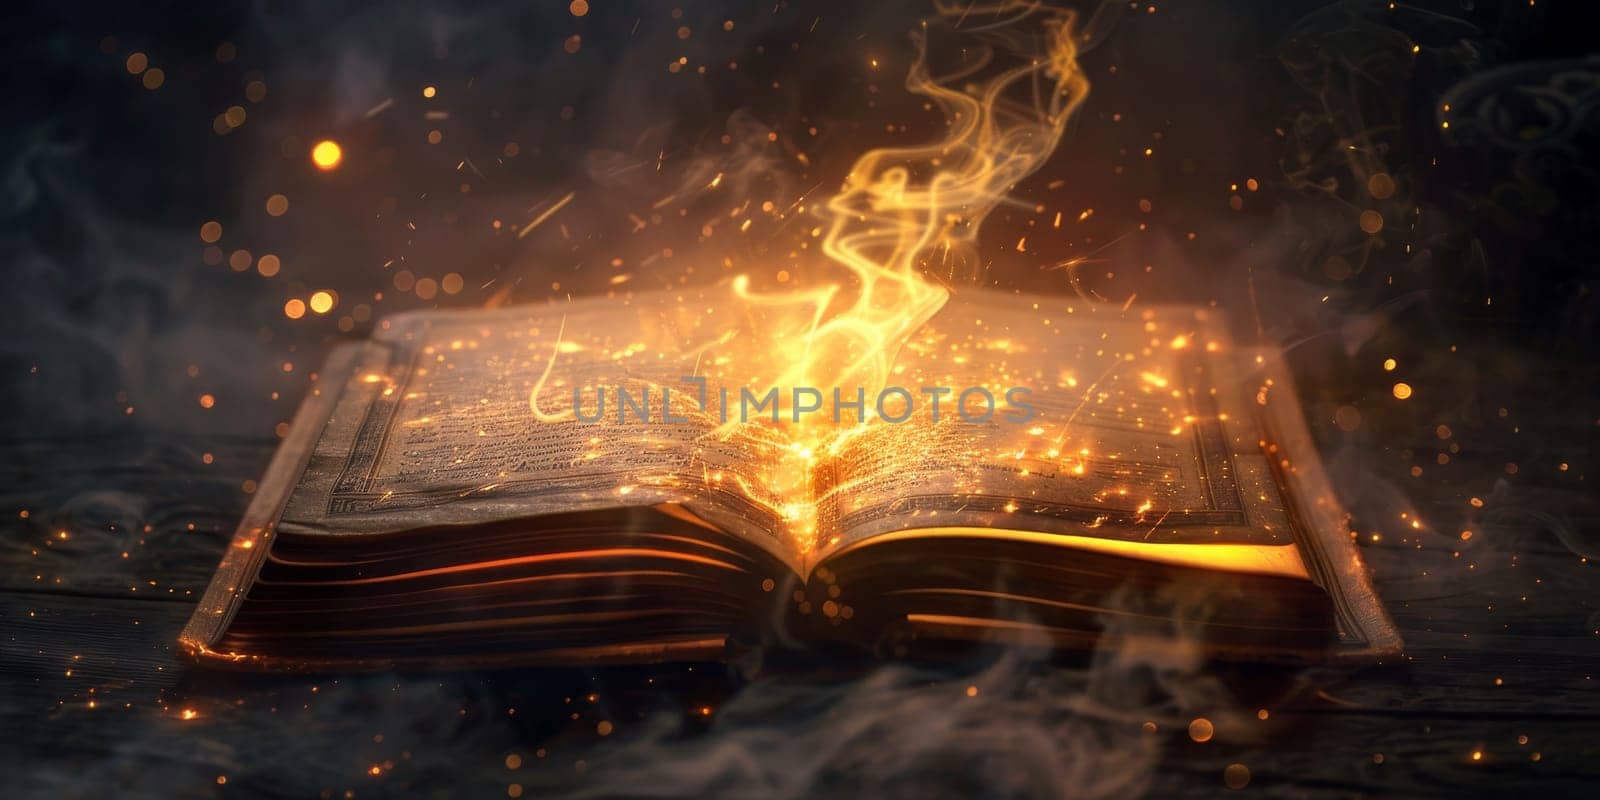 An open spellbook with flames bursting out of its pages